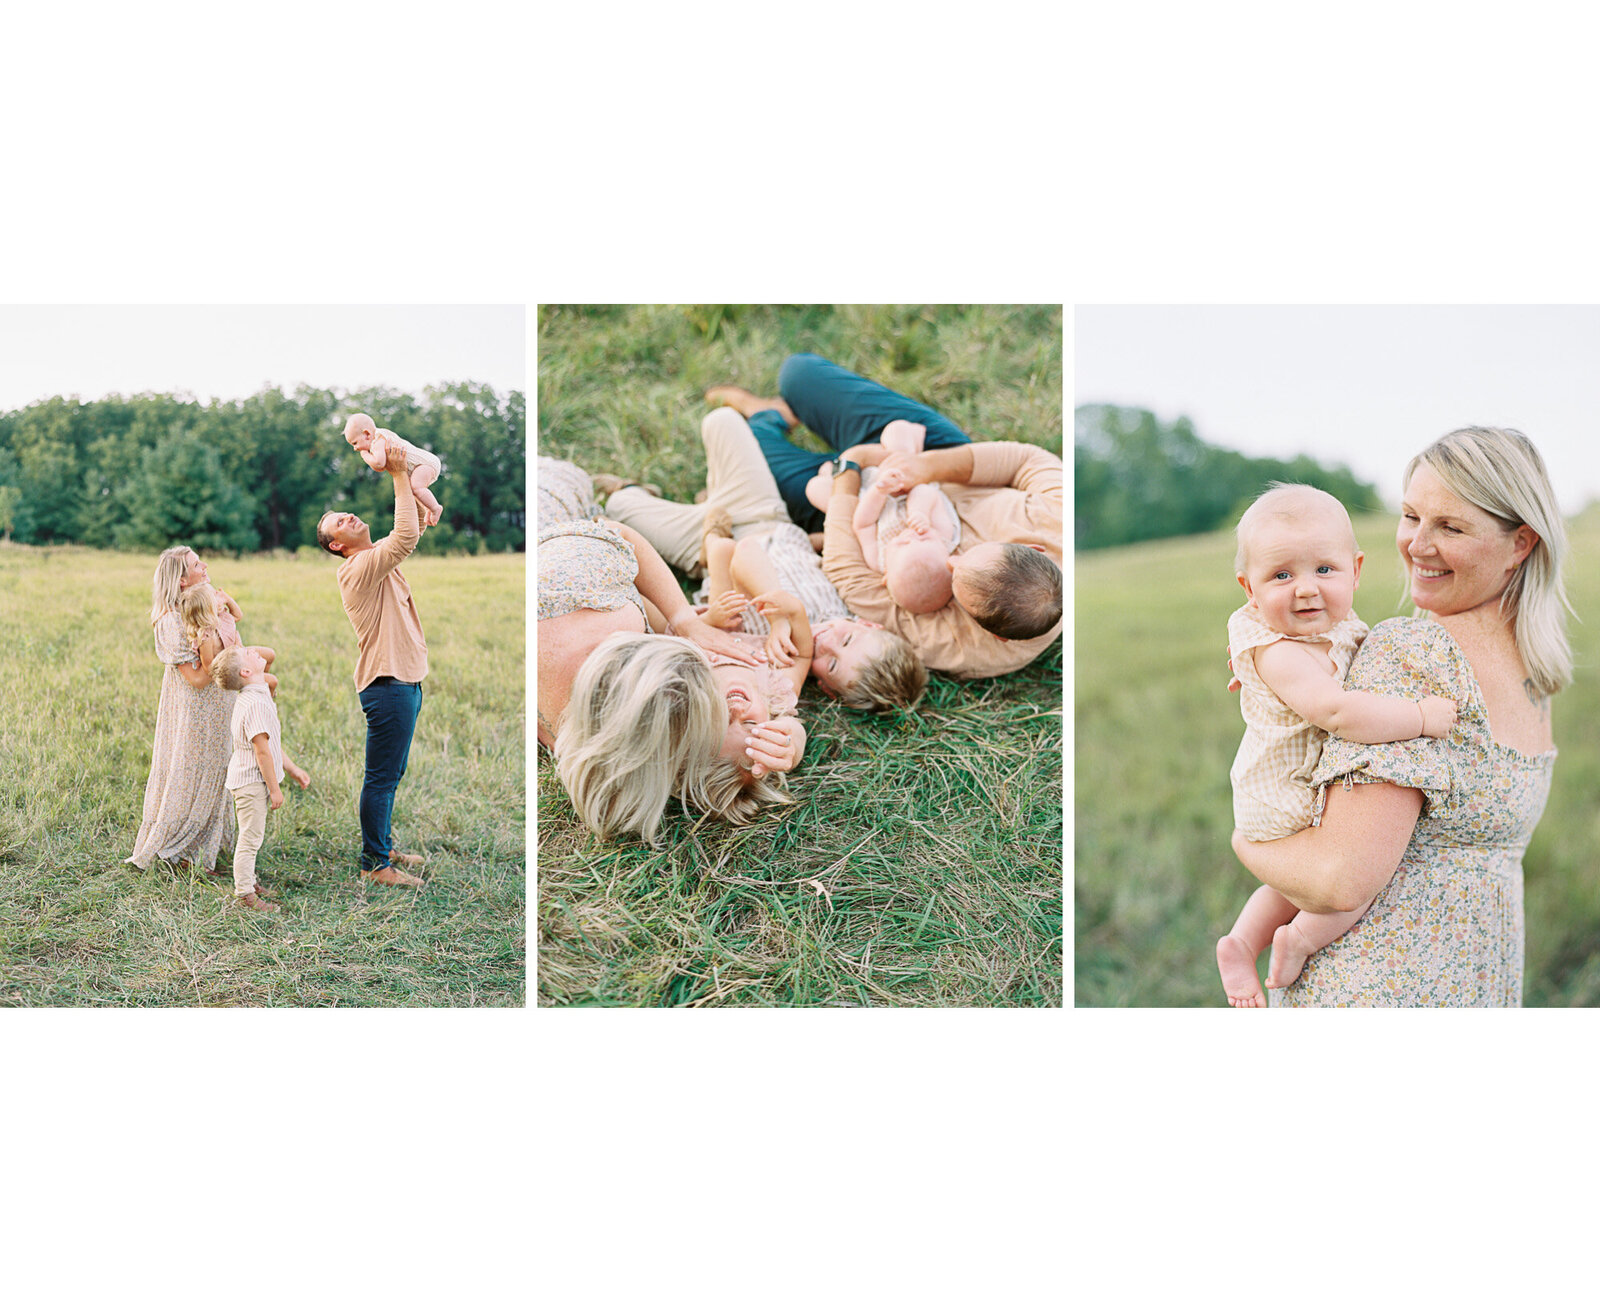 family in high end clothing during summer family session in a grassy field by Madison family photographer, Talia Laird Photography